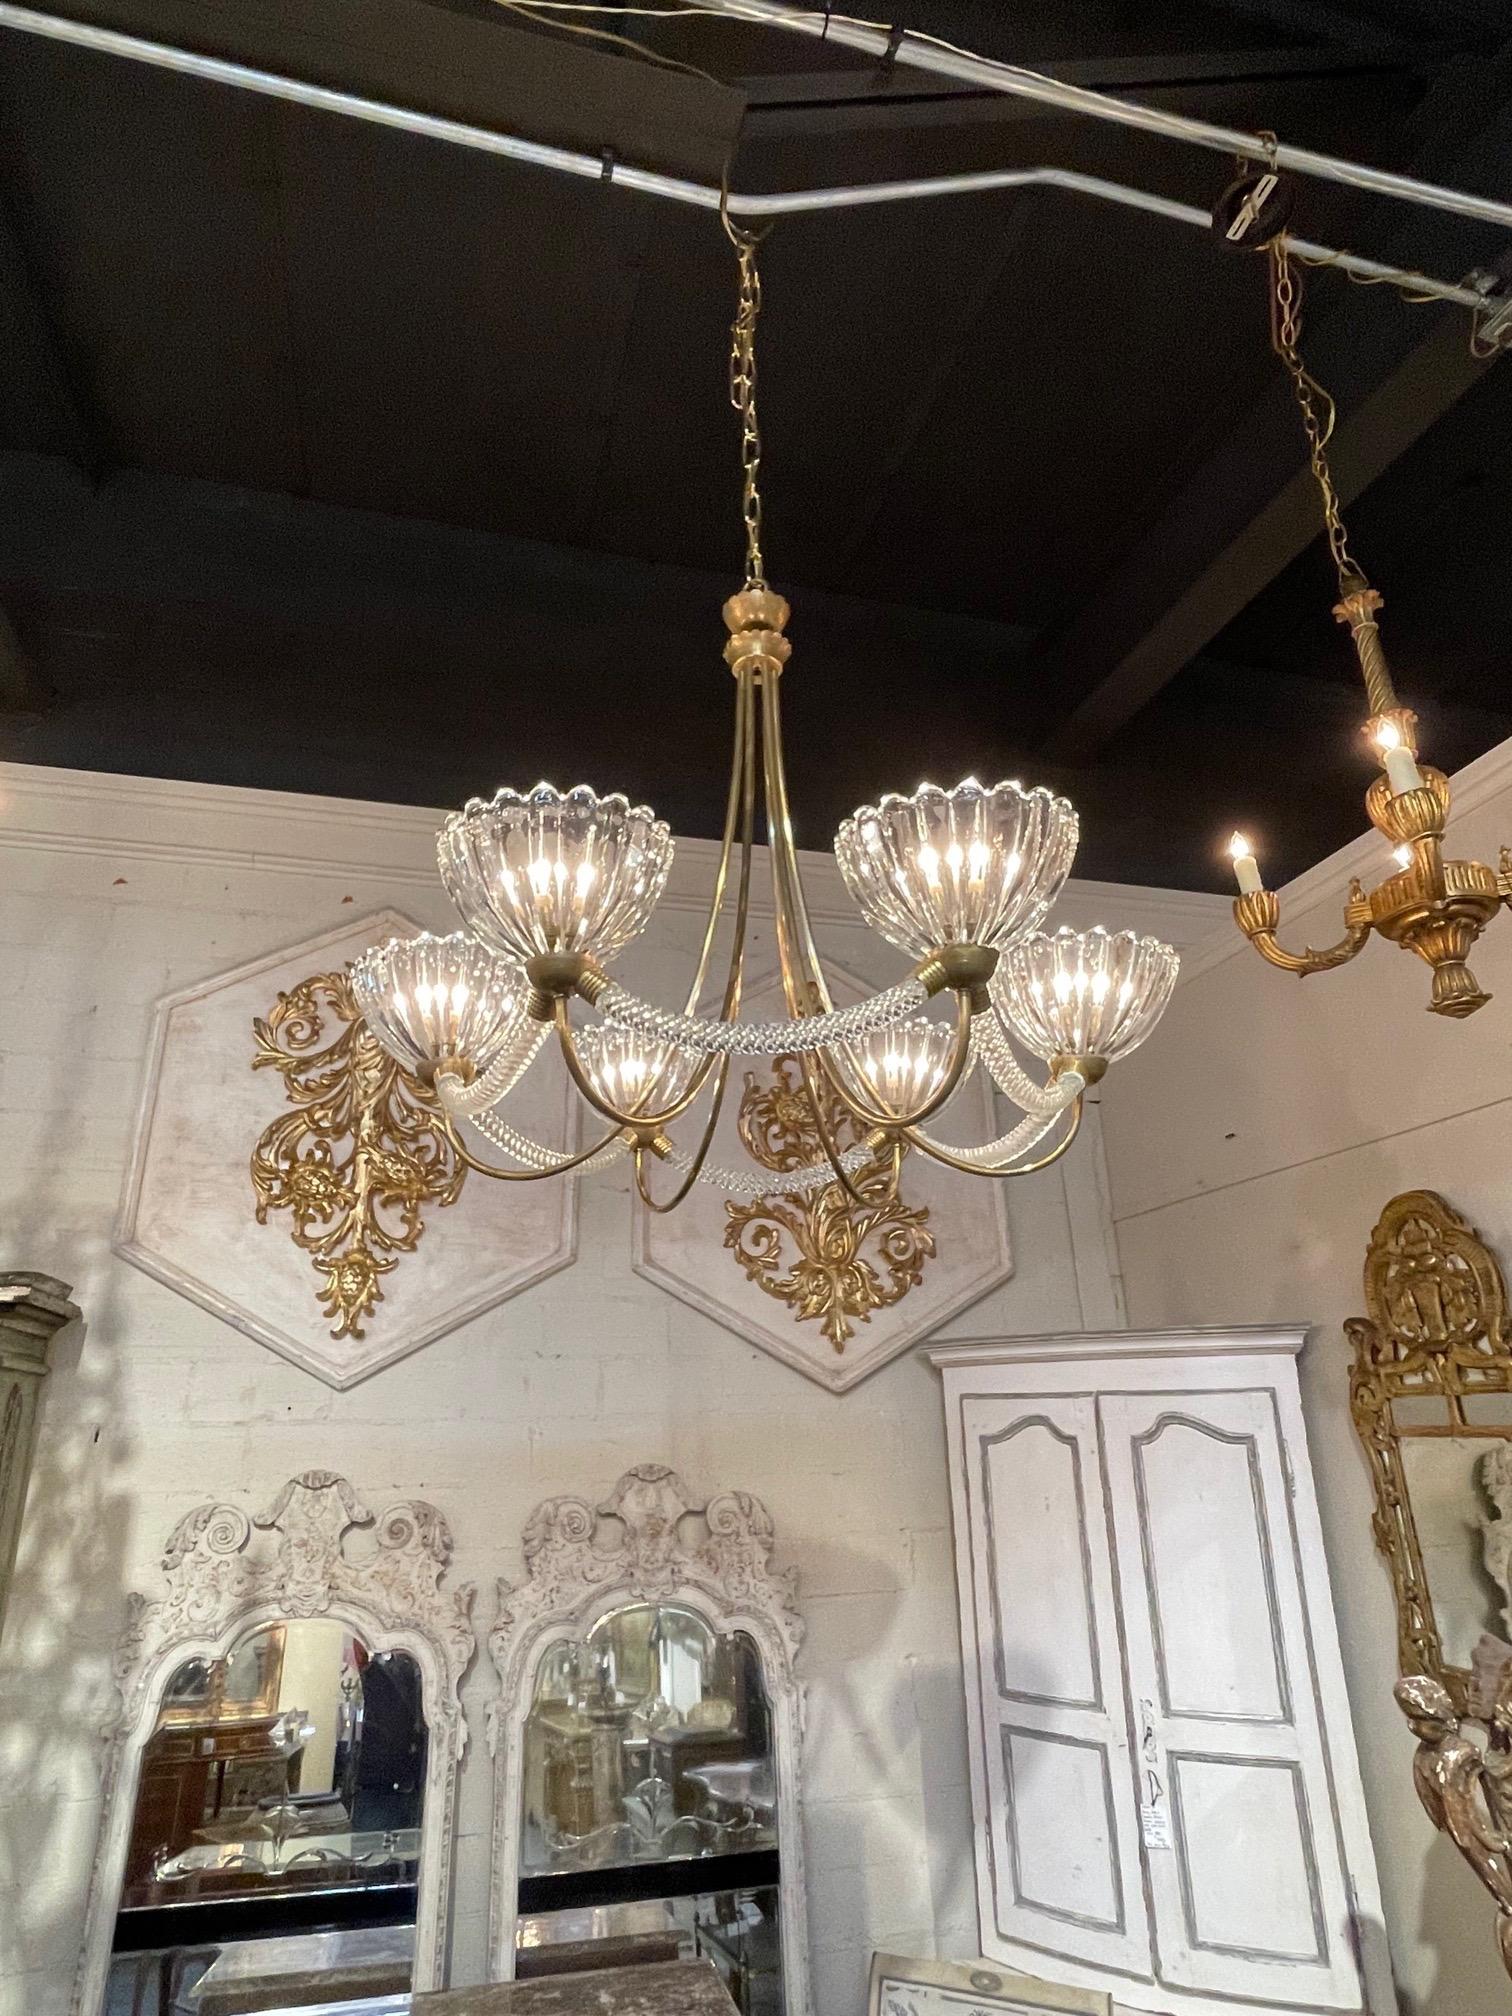 Exquisite vintage Italian glass and brass chandelier with 6 lights by Barovier and Toso. Beautiful curved base and along with the glistening glass are so pretty!